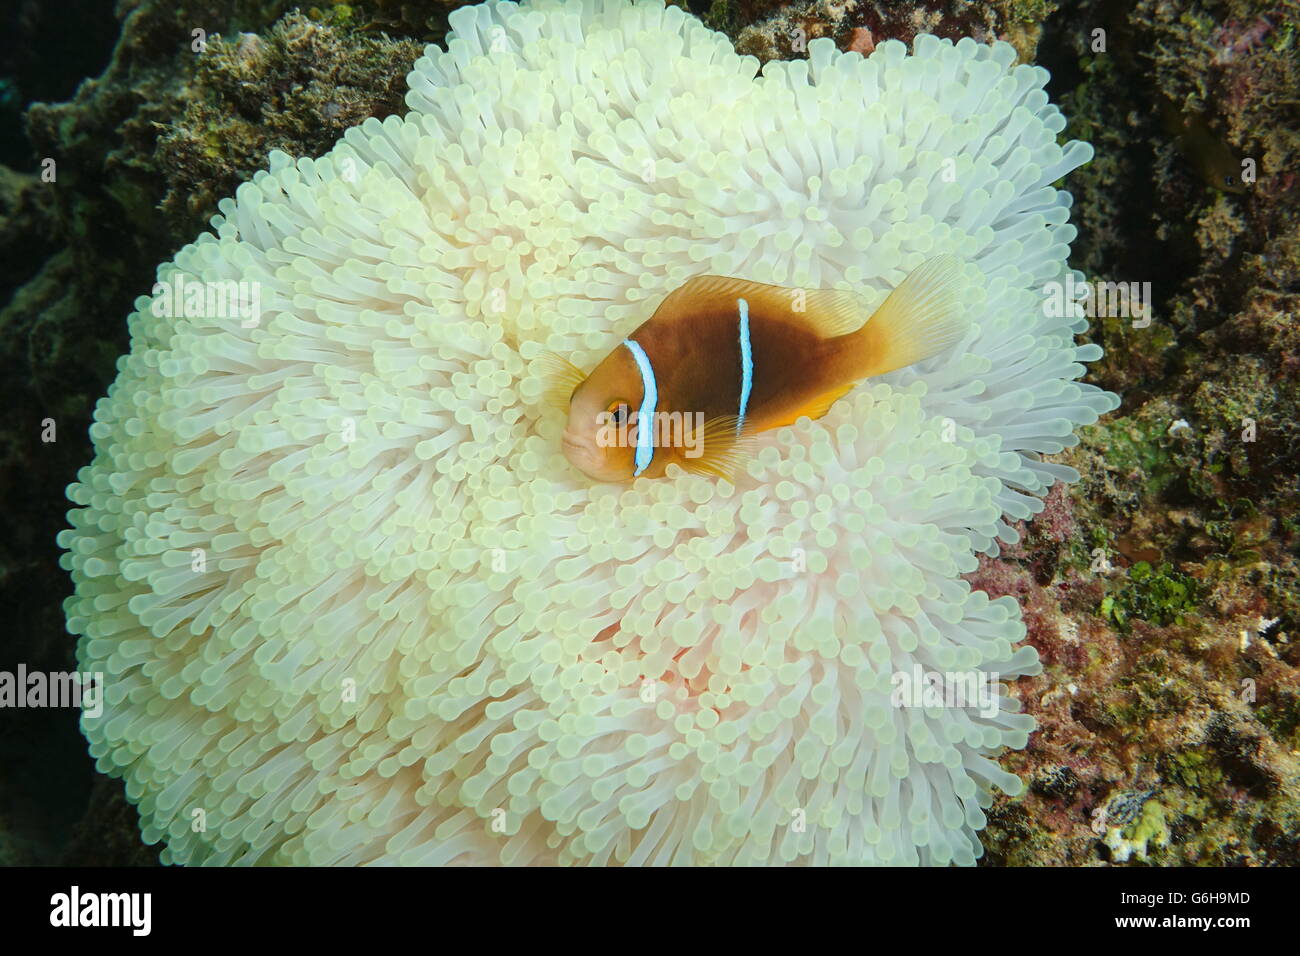 A tropical fish orange-fin anemonefish, Amphiprion chrysopterus, on sea anemone tentacles, Pacific ocean, French Polynesia Stock Photo